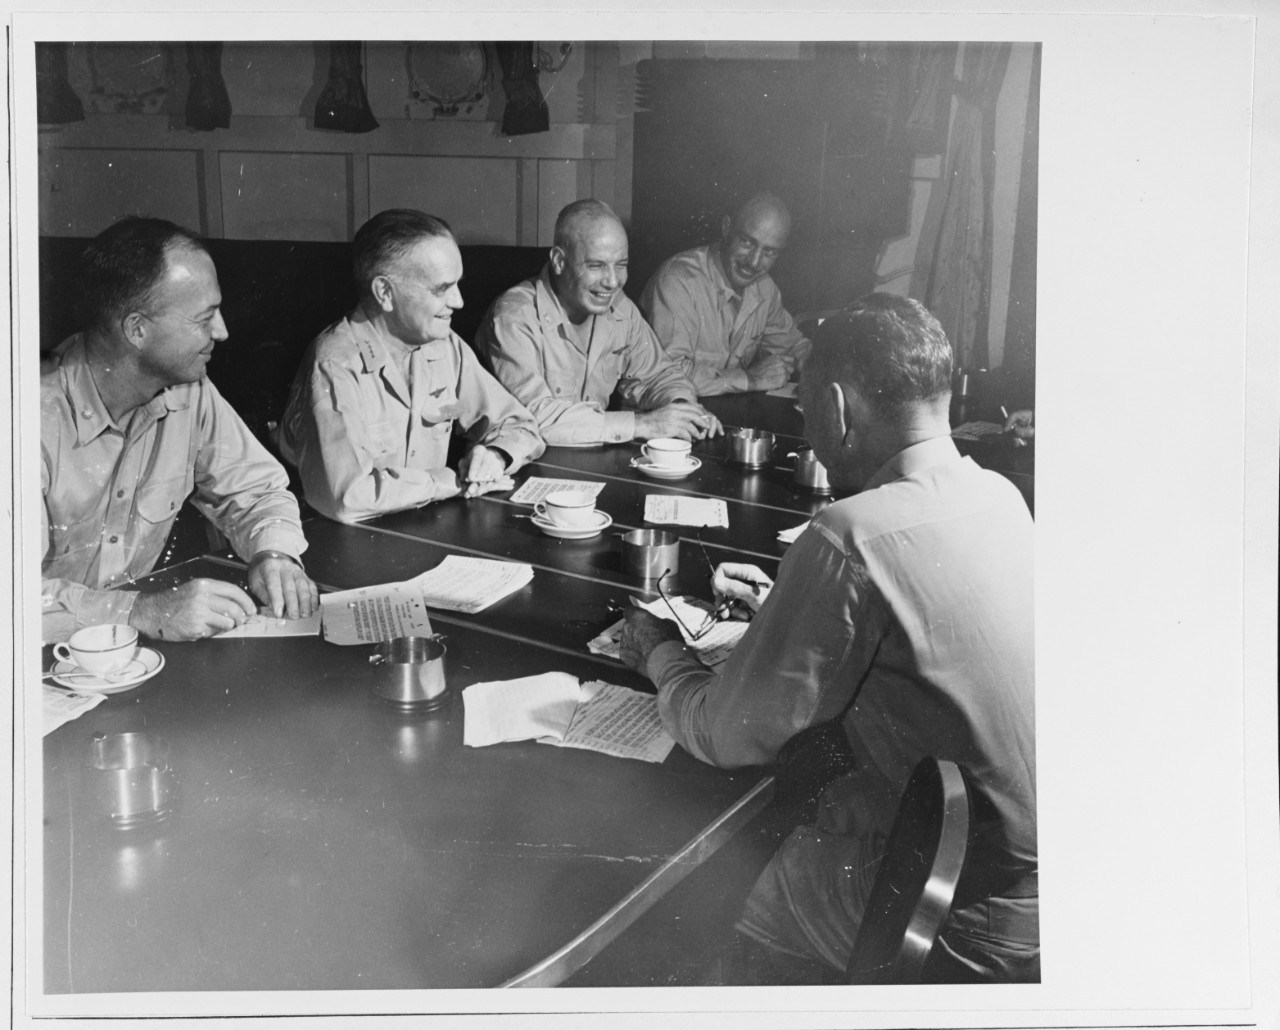 Admiral William F. Halsey, Commander Third Fleet (center), has a conference with some members of his staff